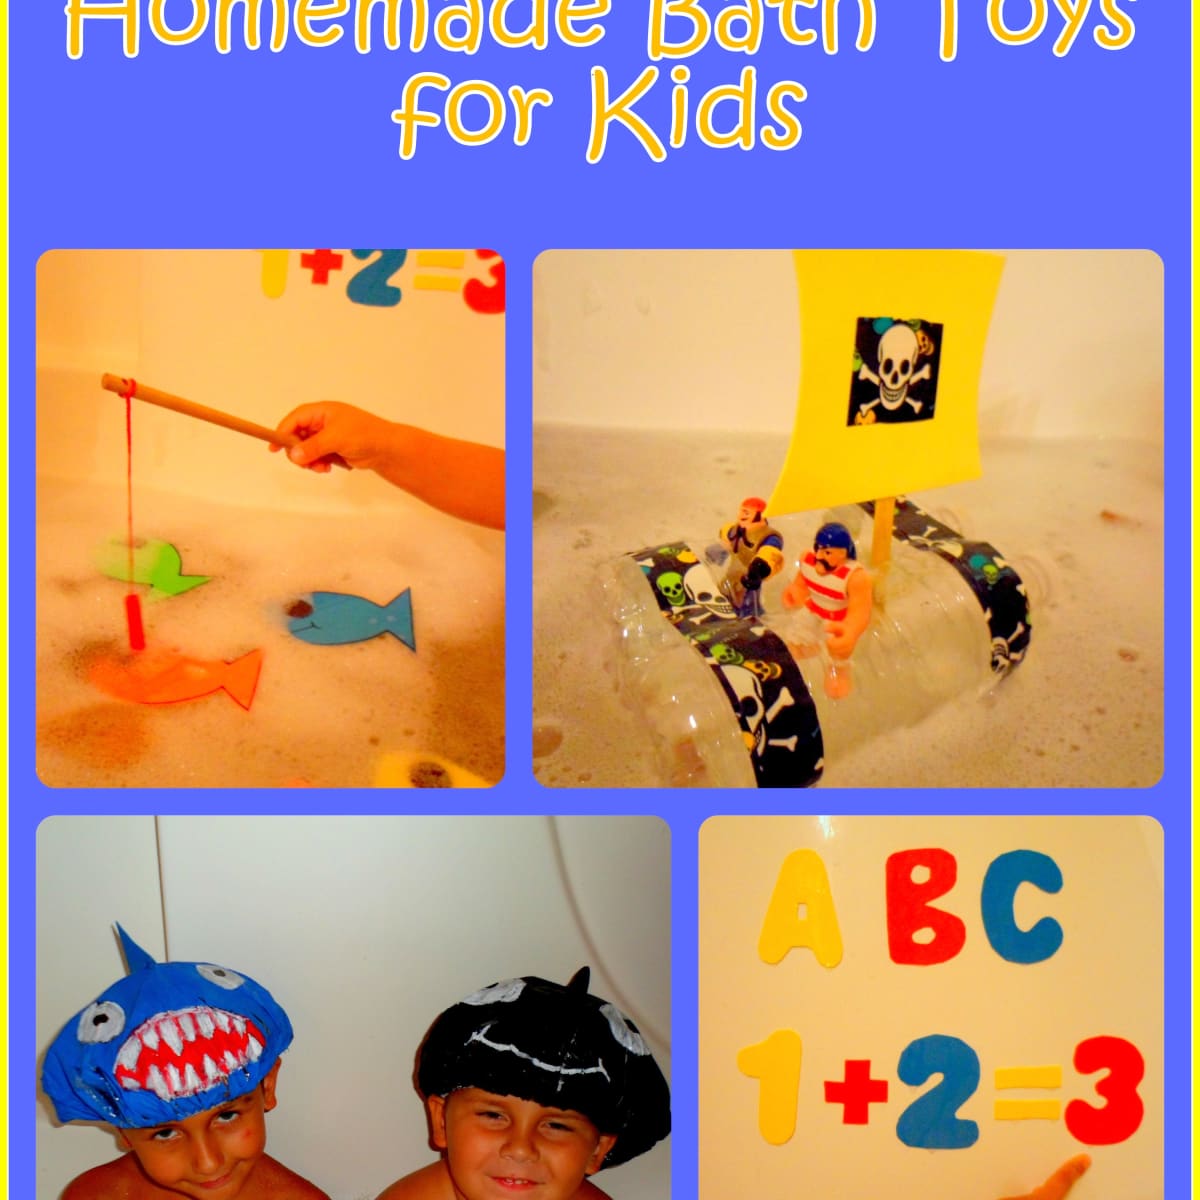 How to Make Homemade Bath Toys for Kids - HubPages